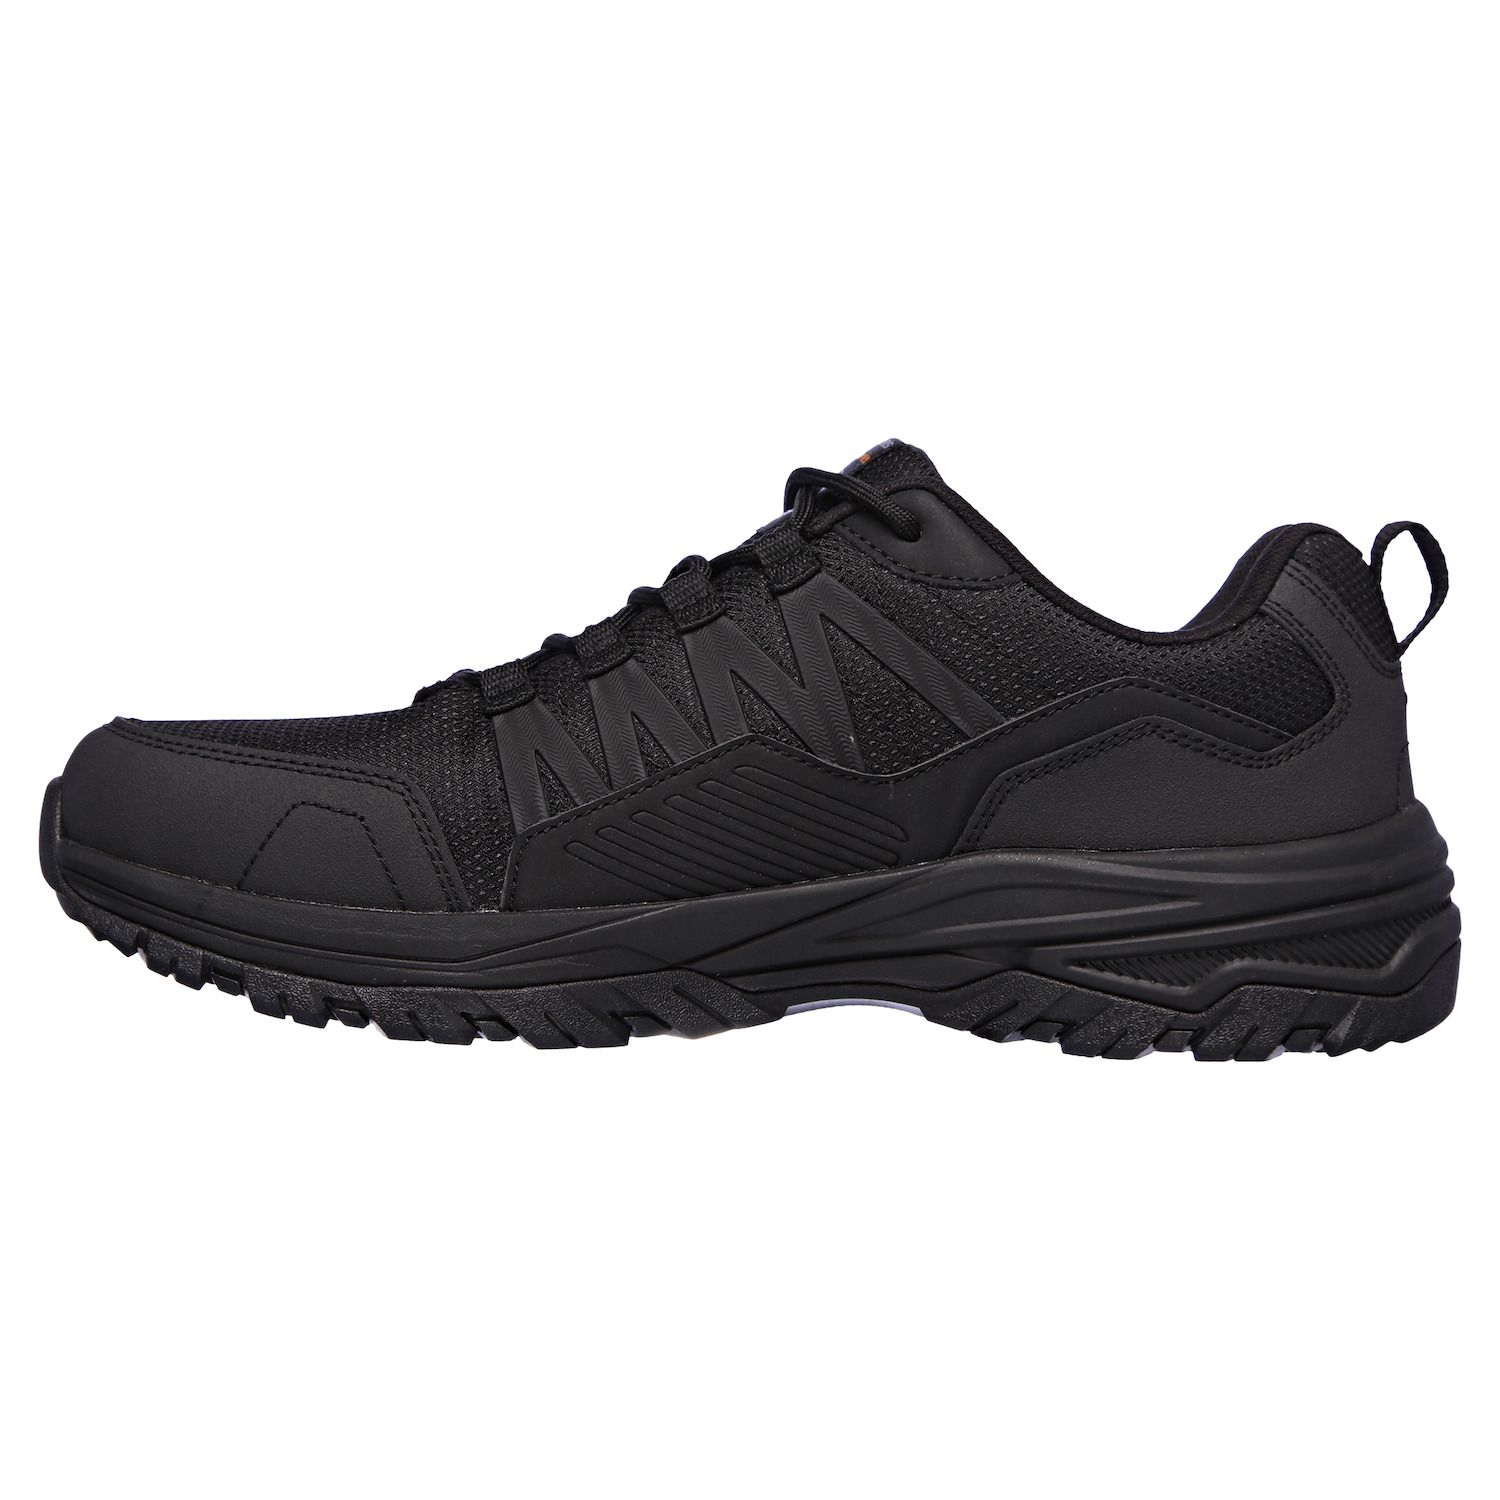 skechers safety shoes